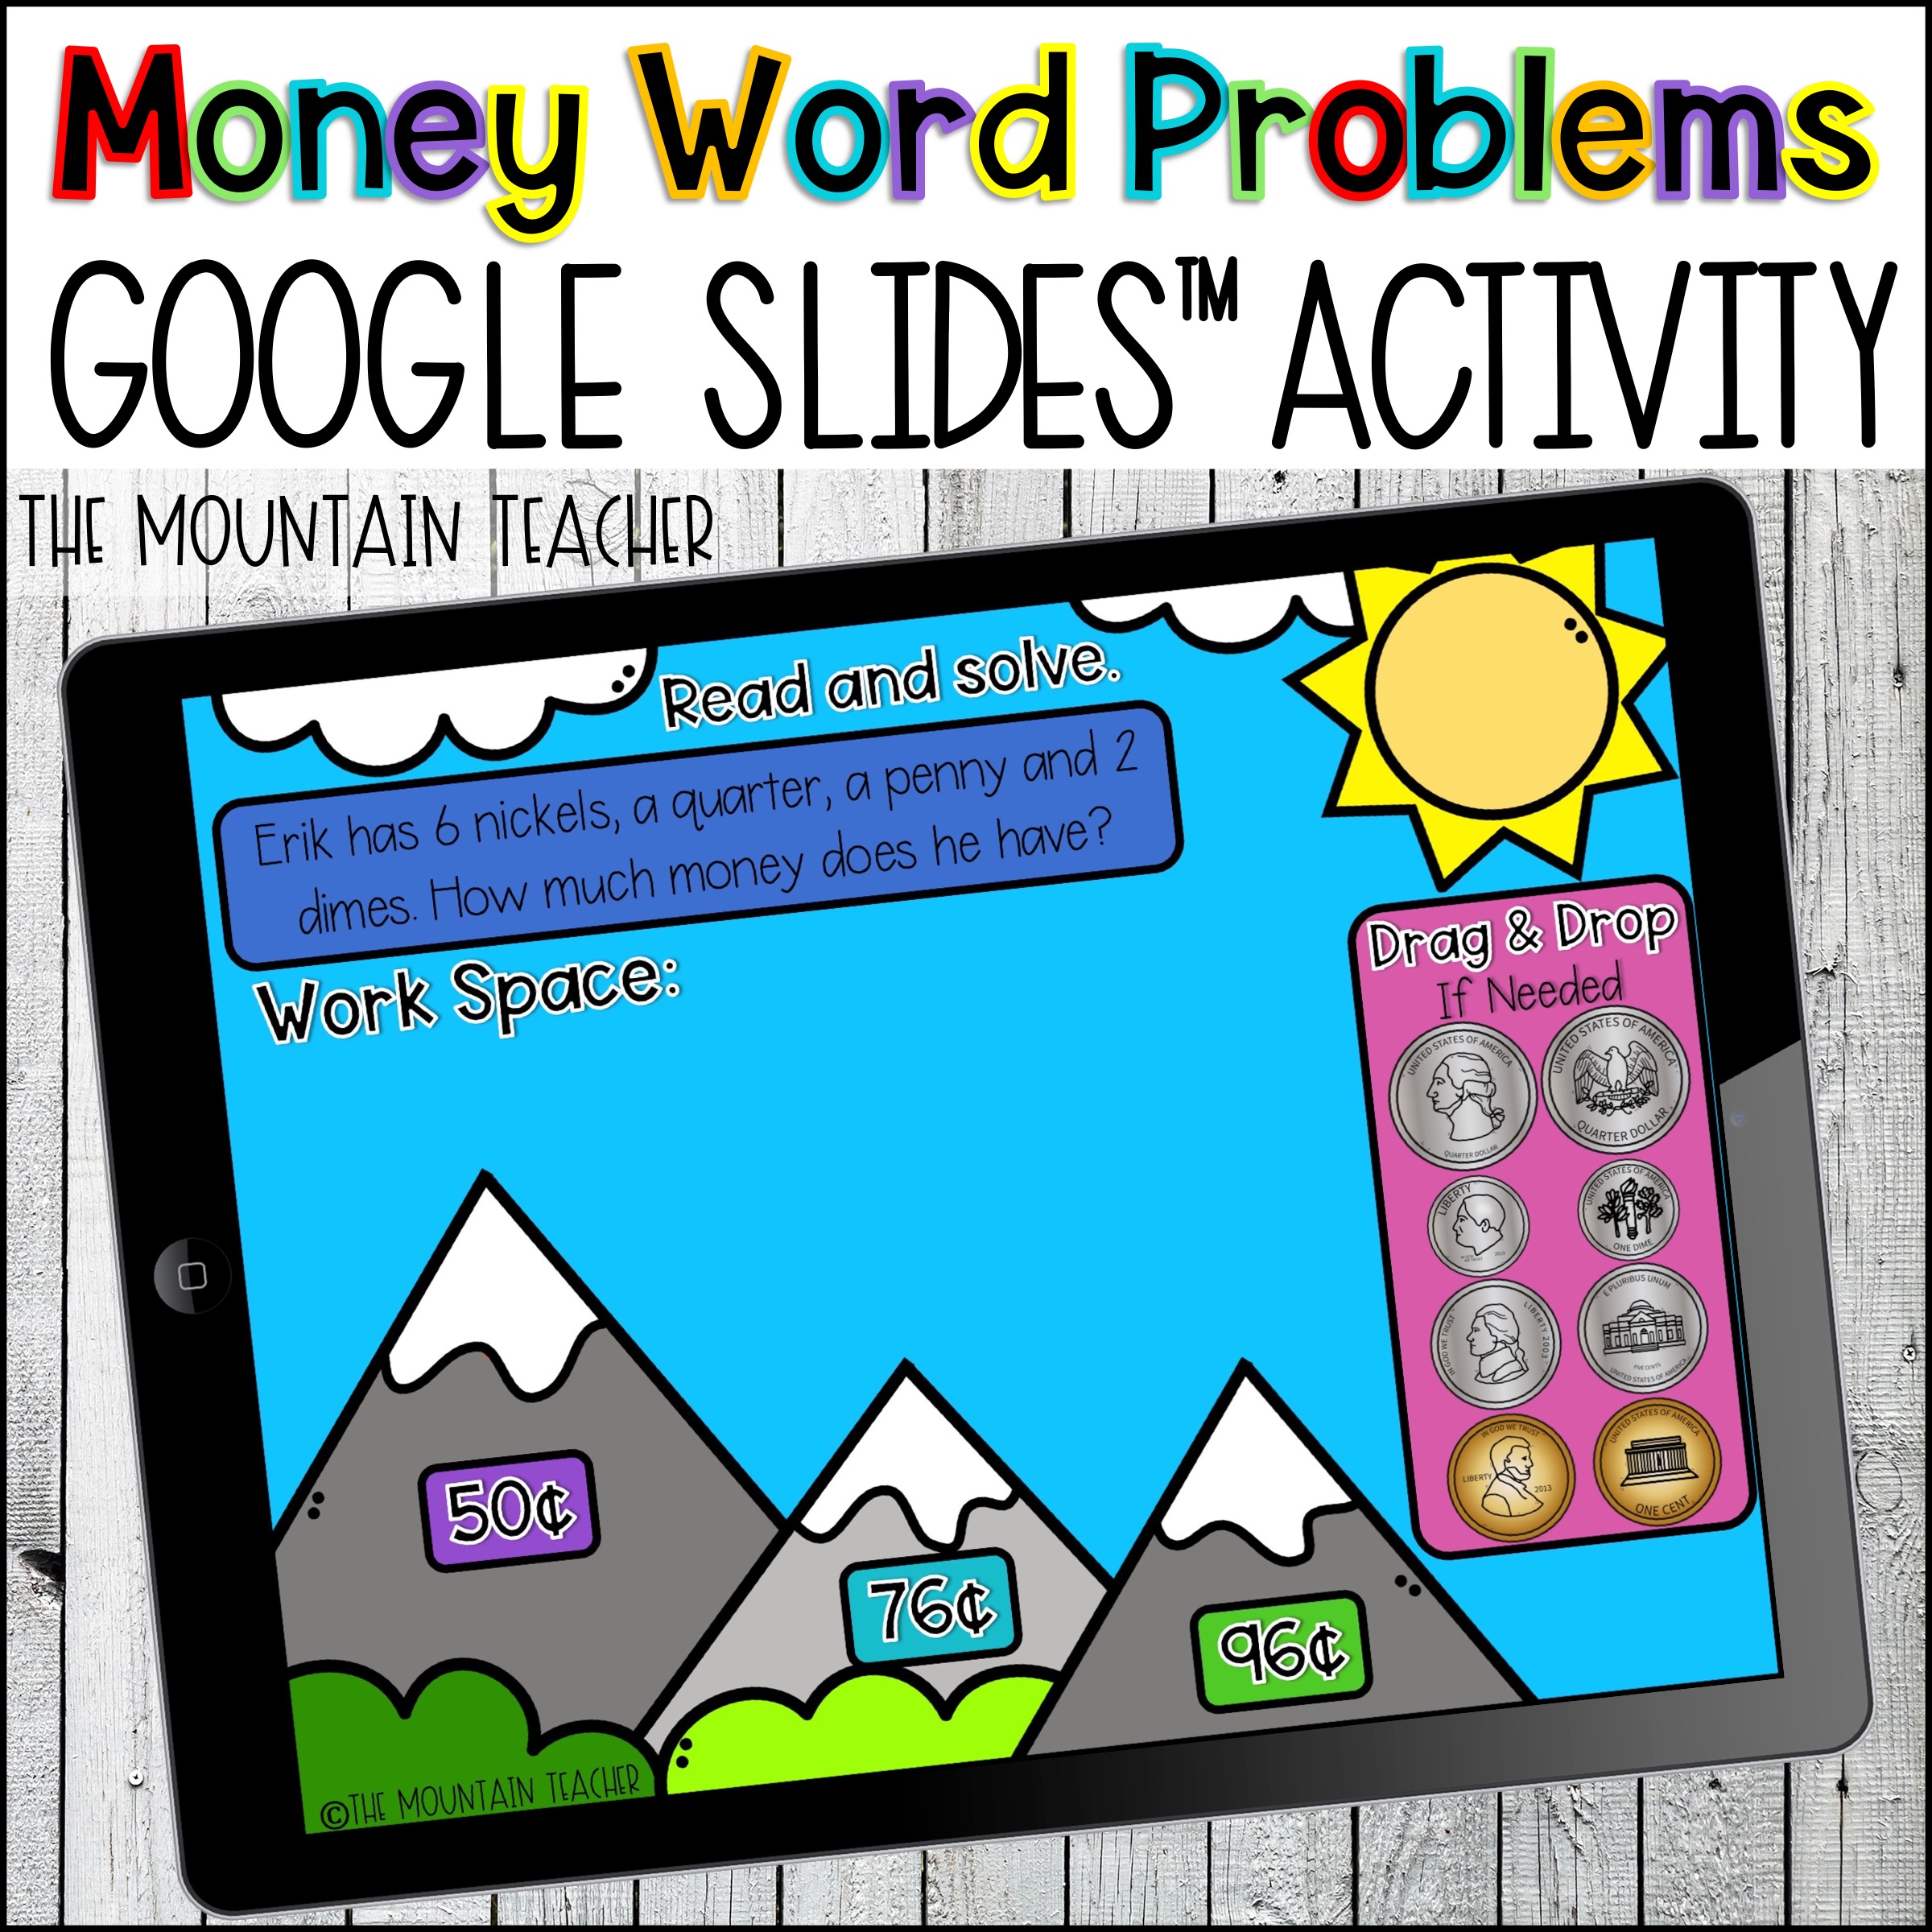 Counting Coins Google Classroom Activity for Slides about Money By The Mountain Teacher